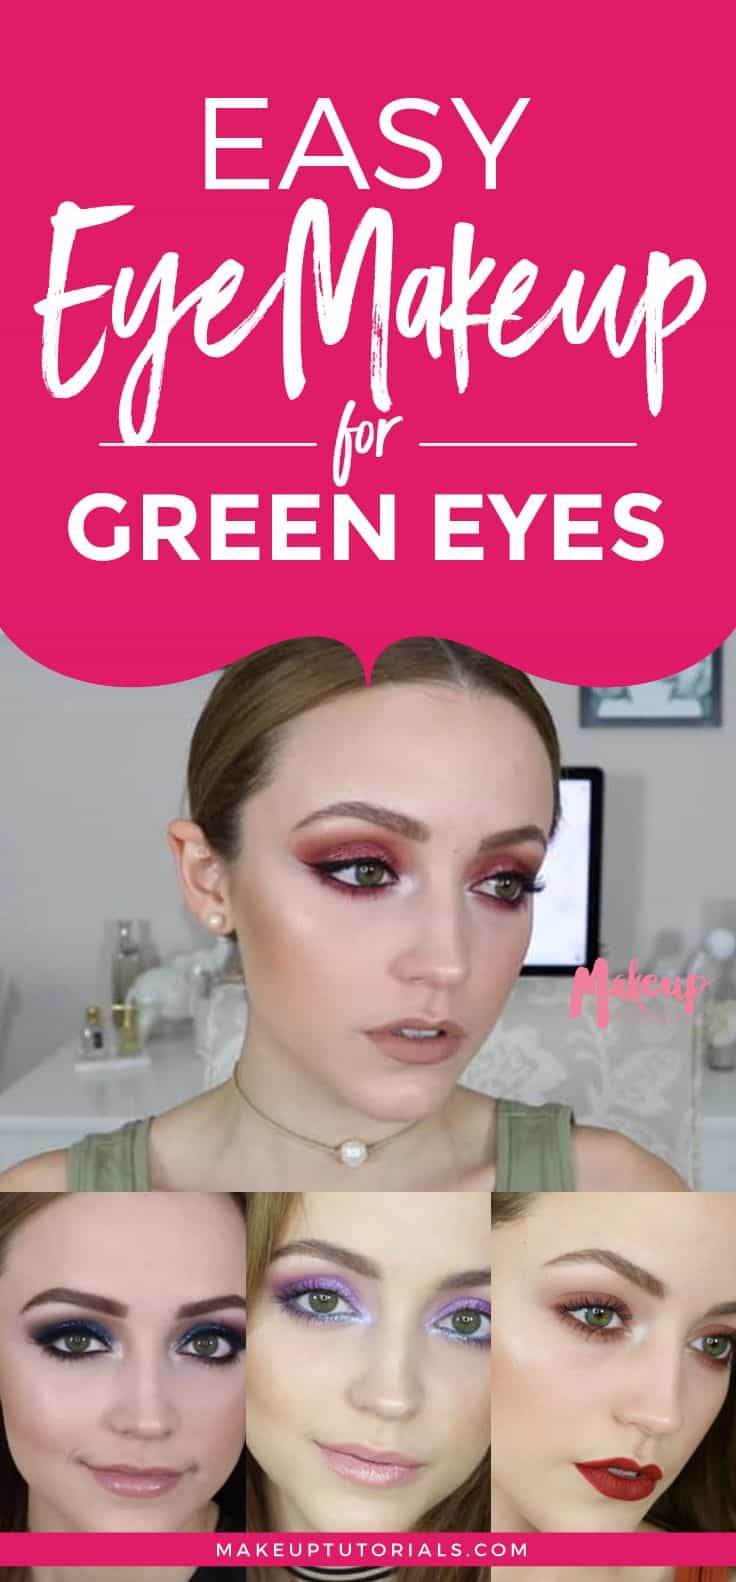 makeup for green eyes | Easy Eye Makeup For Green Eyes | Makeup Tutorials Guide